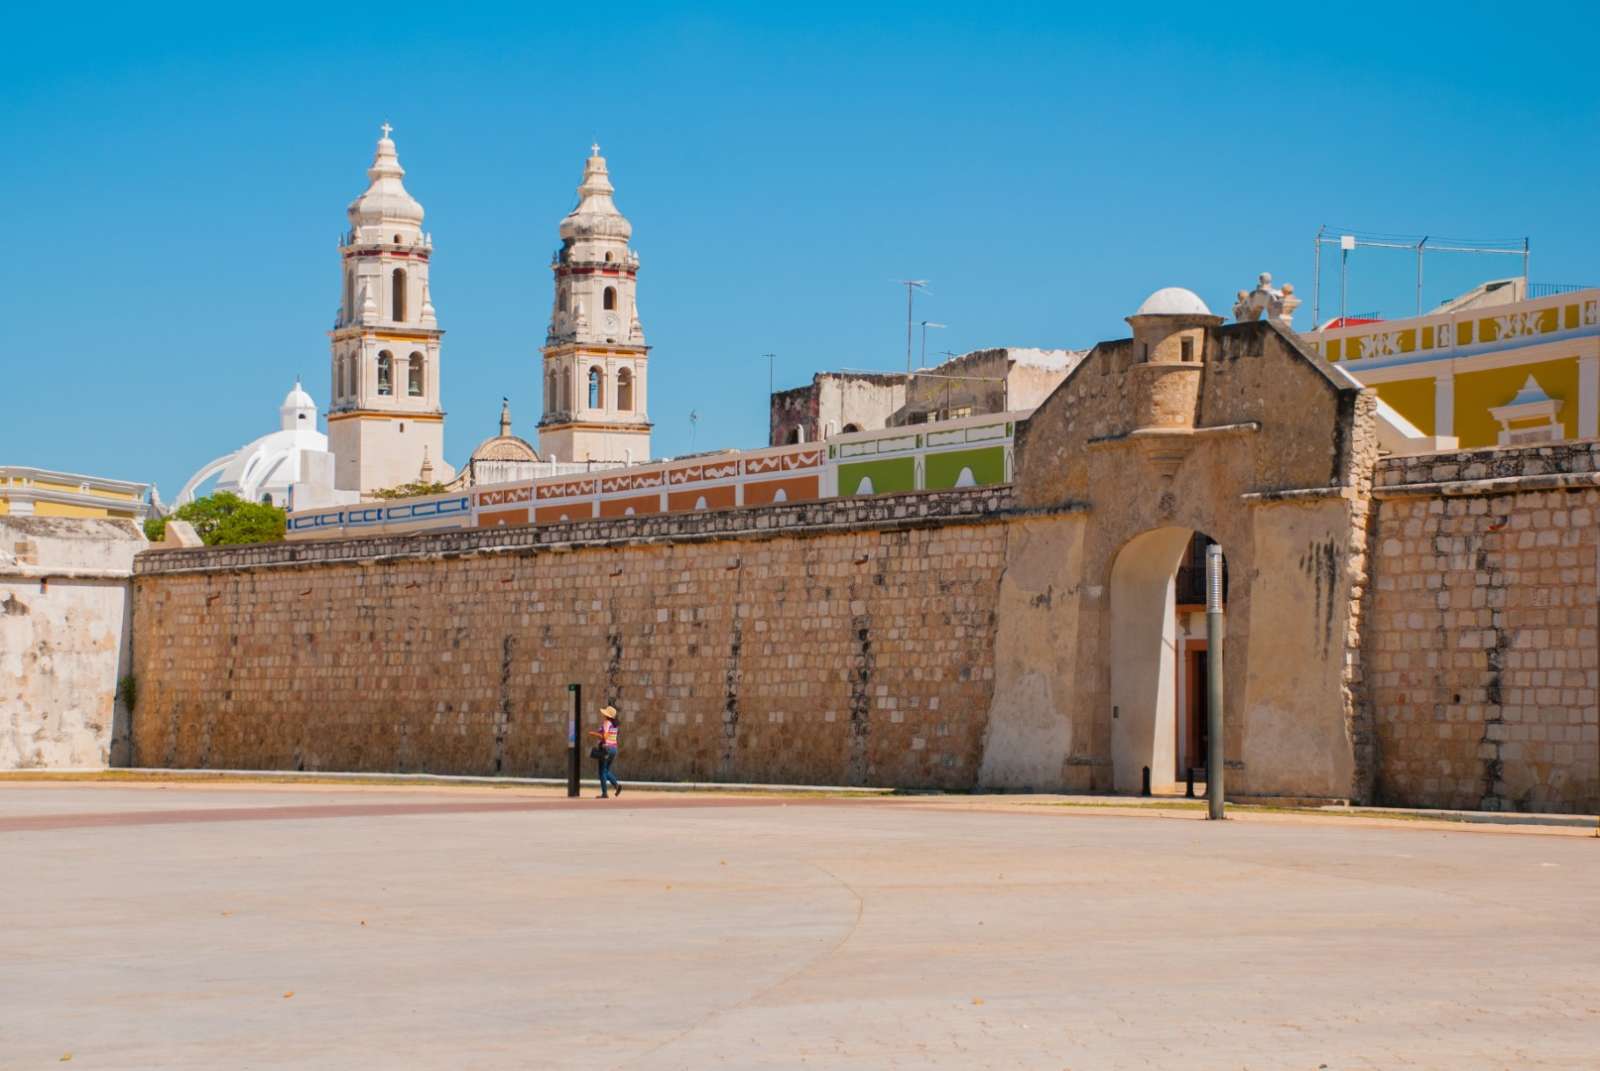 View of cathedral behind city wall in Campeche Mexico